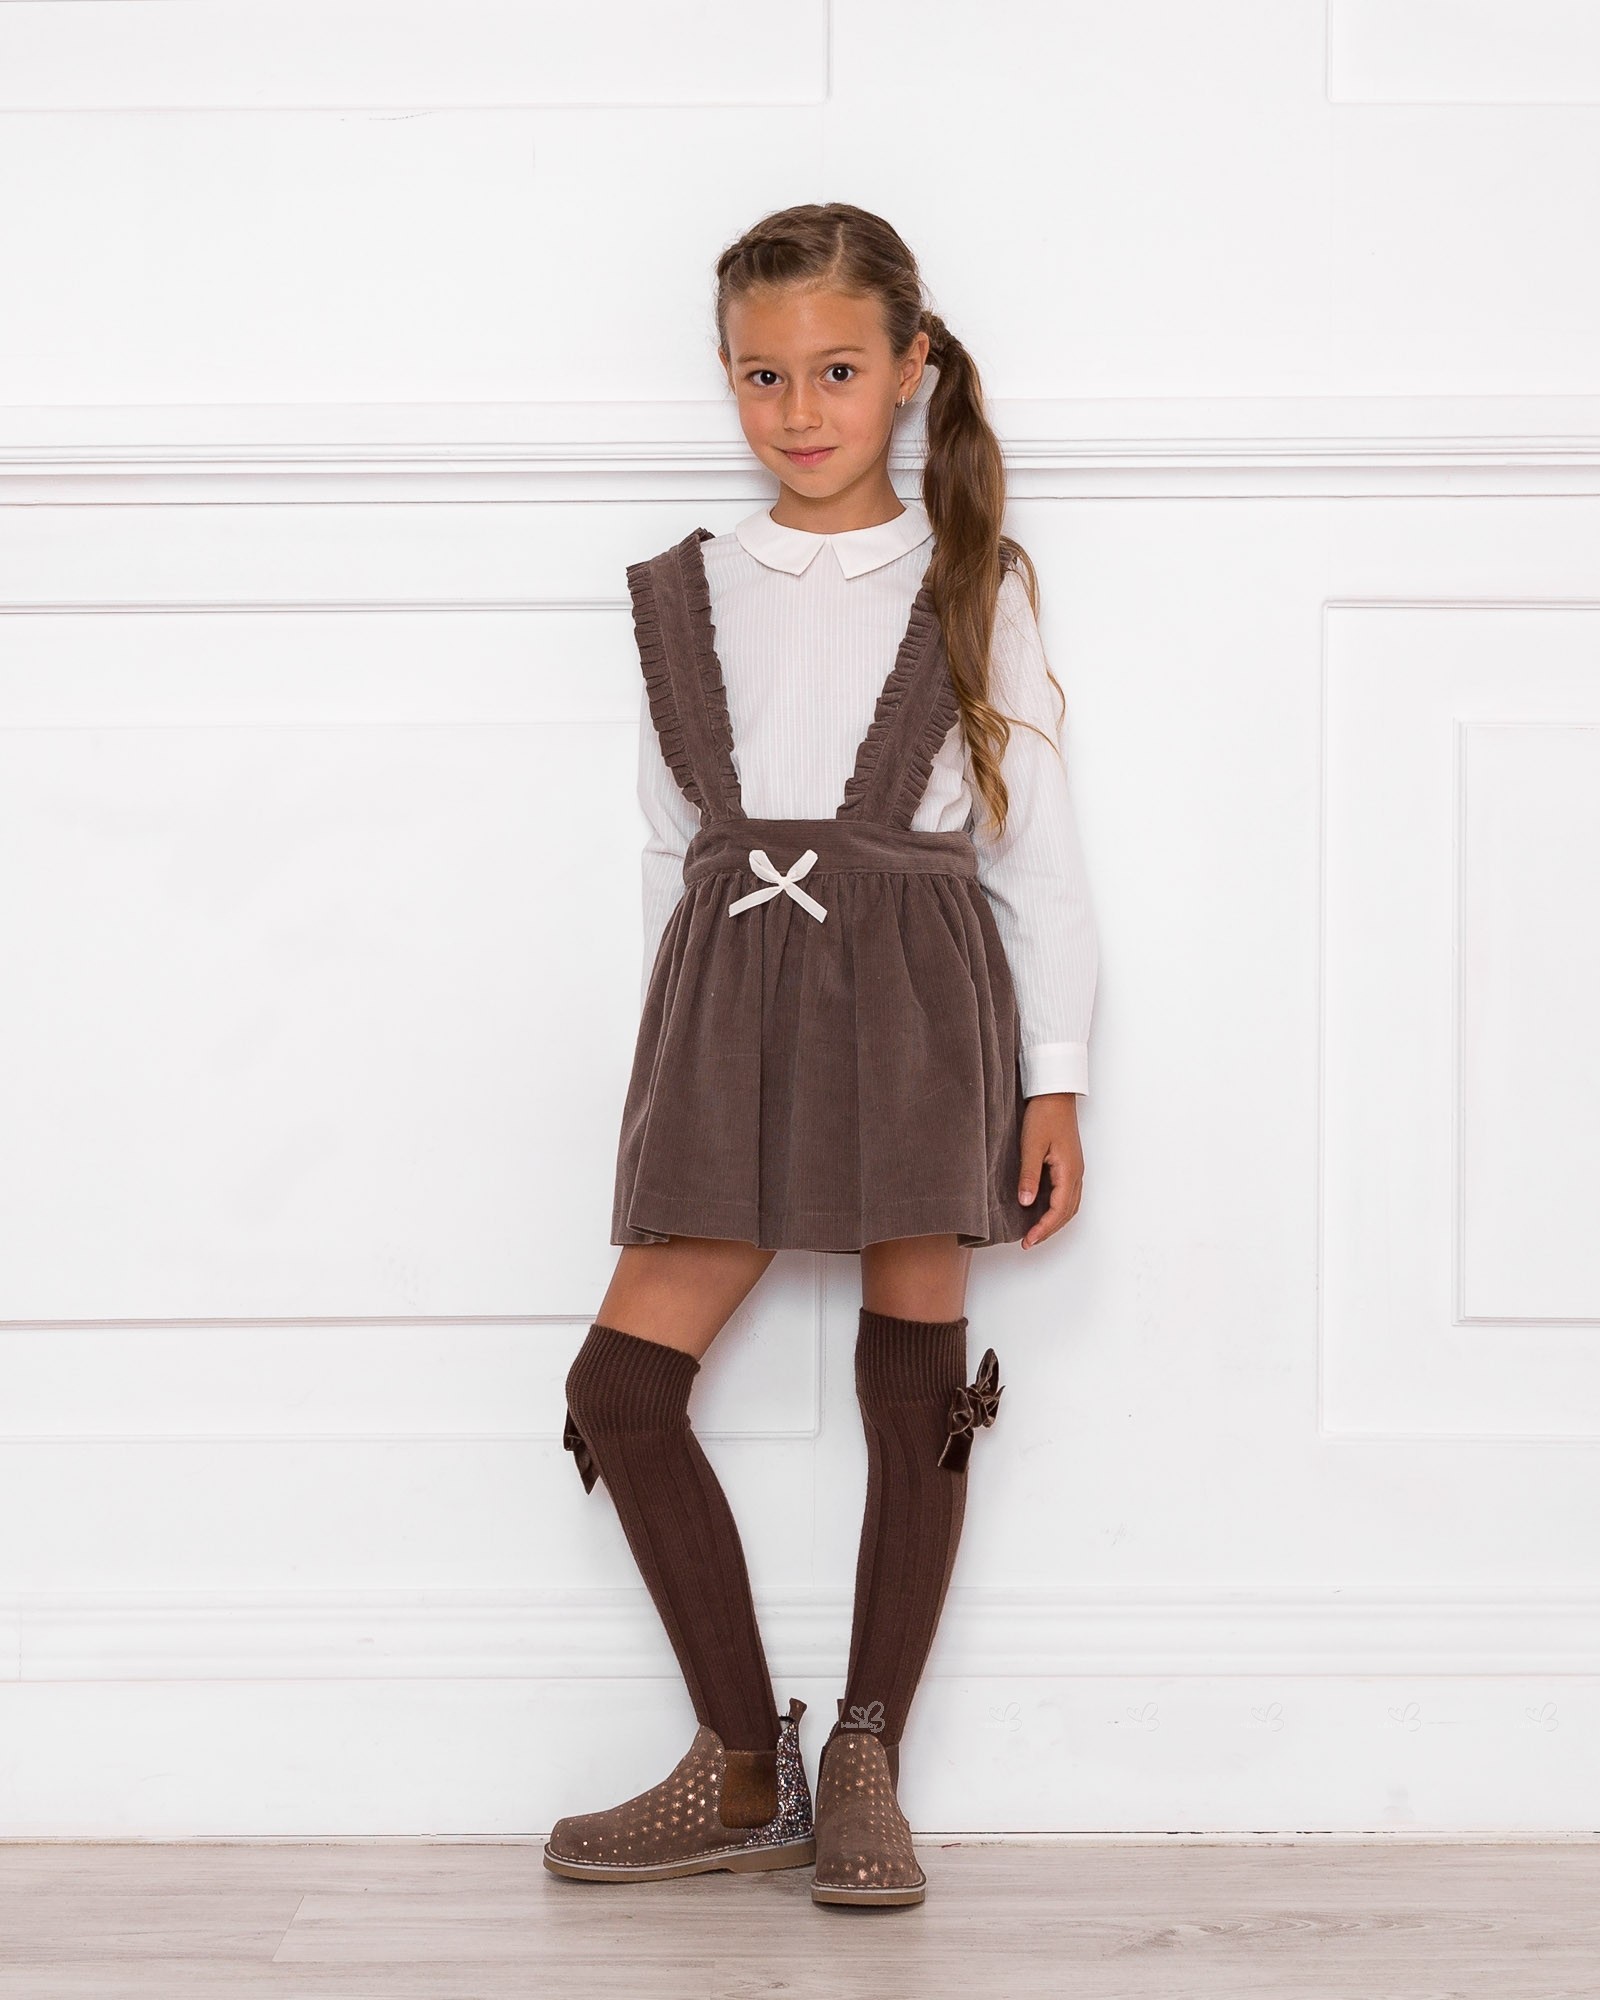 Girls White Blouse with French Collar & Chocolate Skirt Outfit | Missbaby